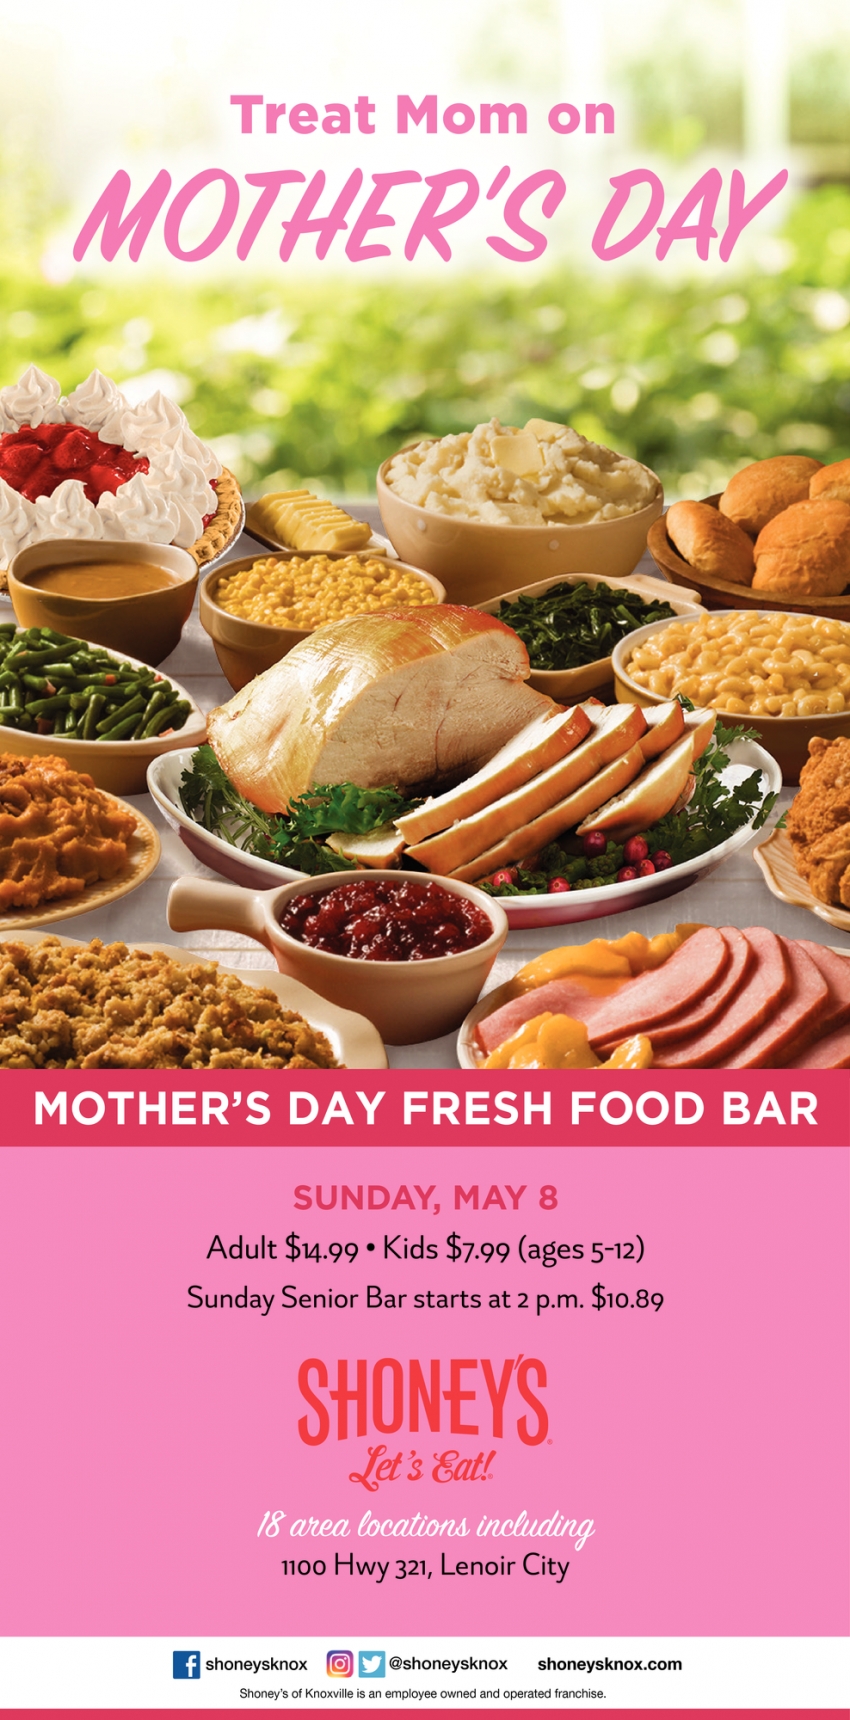 Treat Mon on Mother's Day